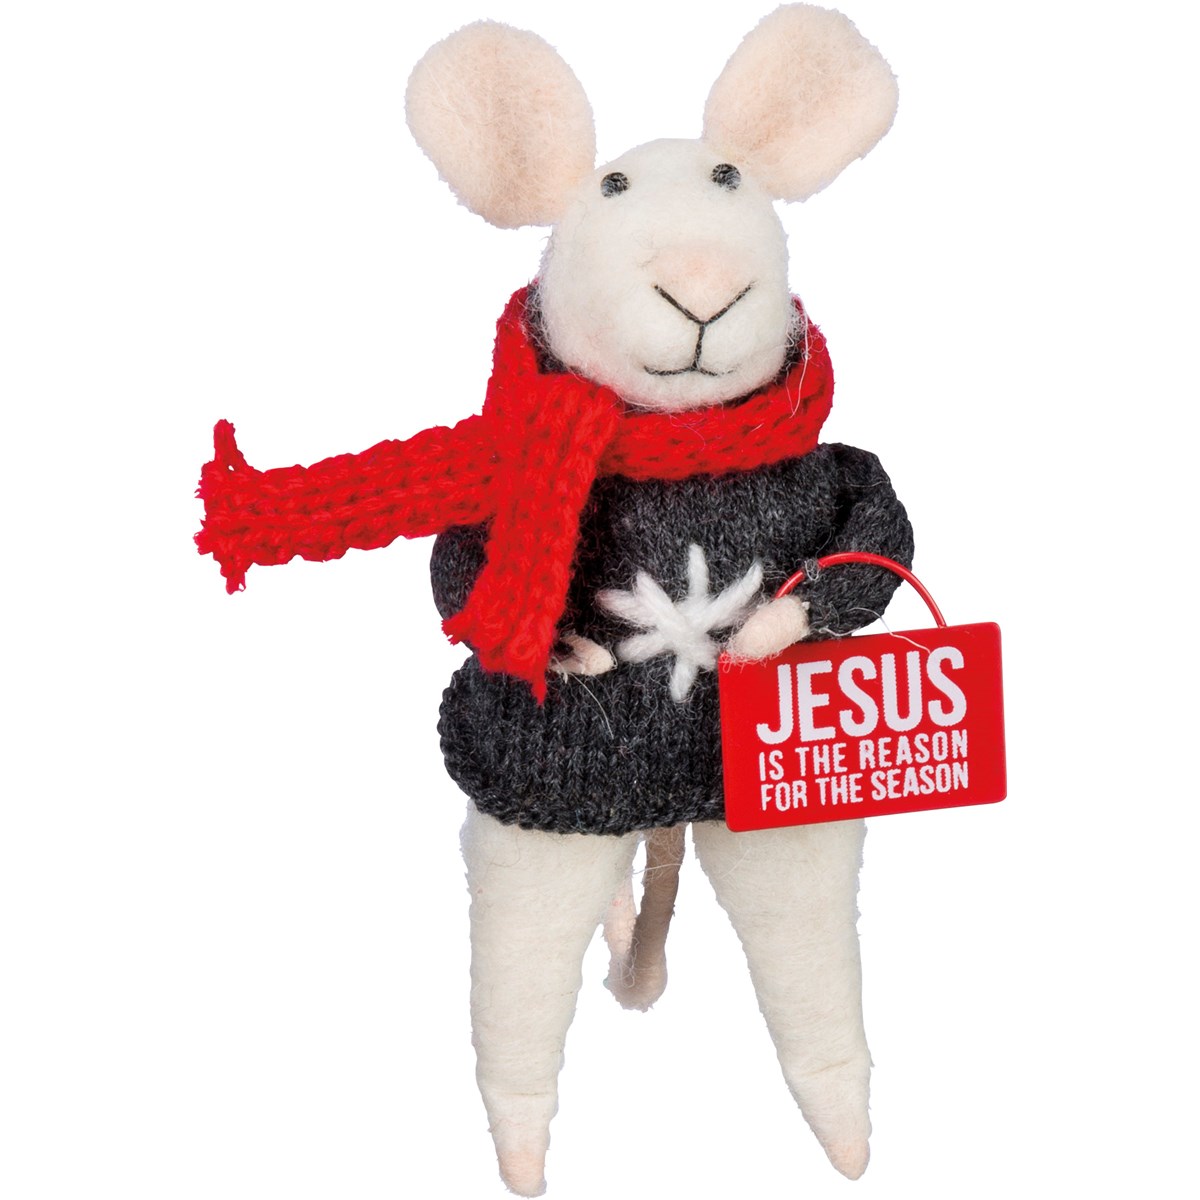 For The Season Mouse Critter - Wool, Polyester, Metal, Plastic